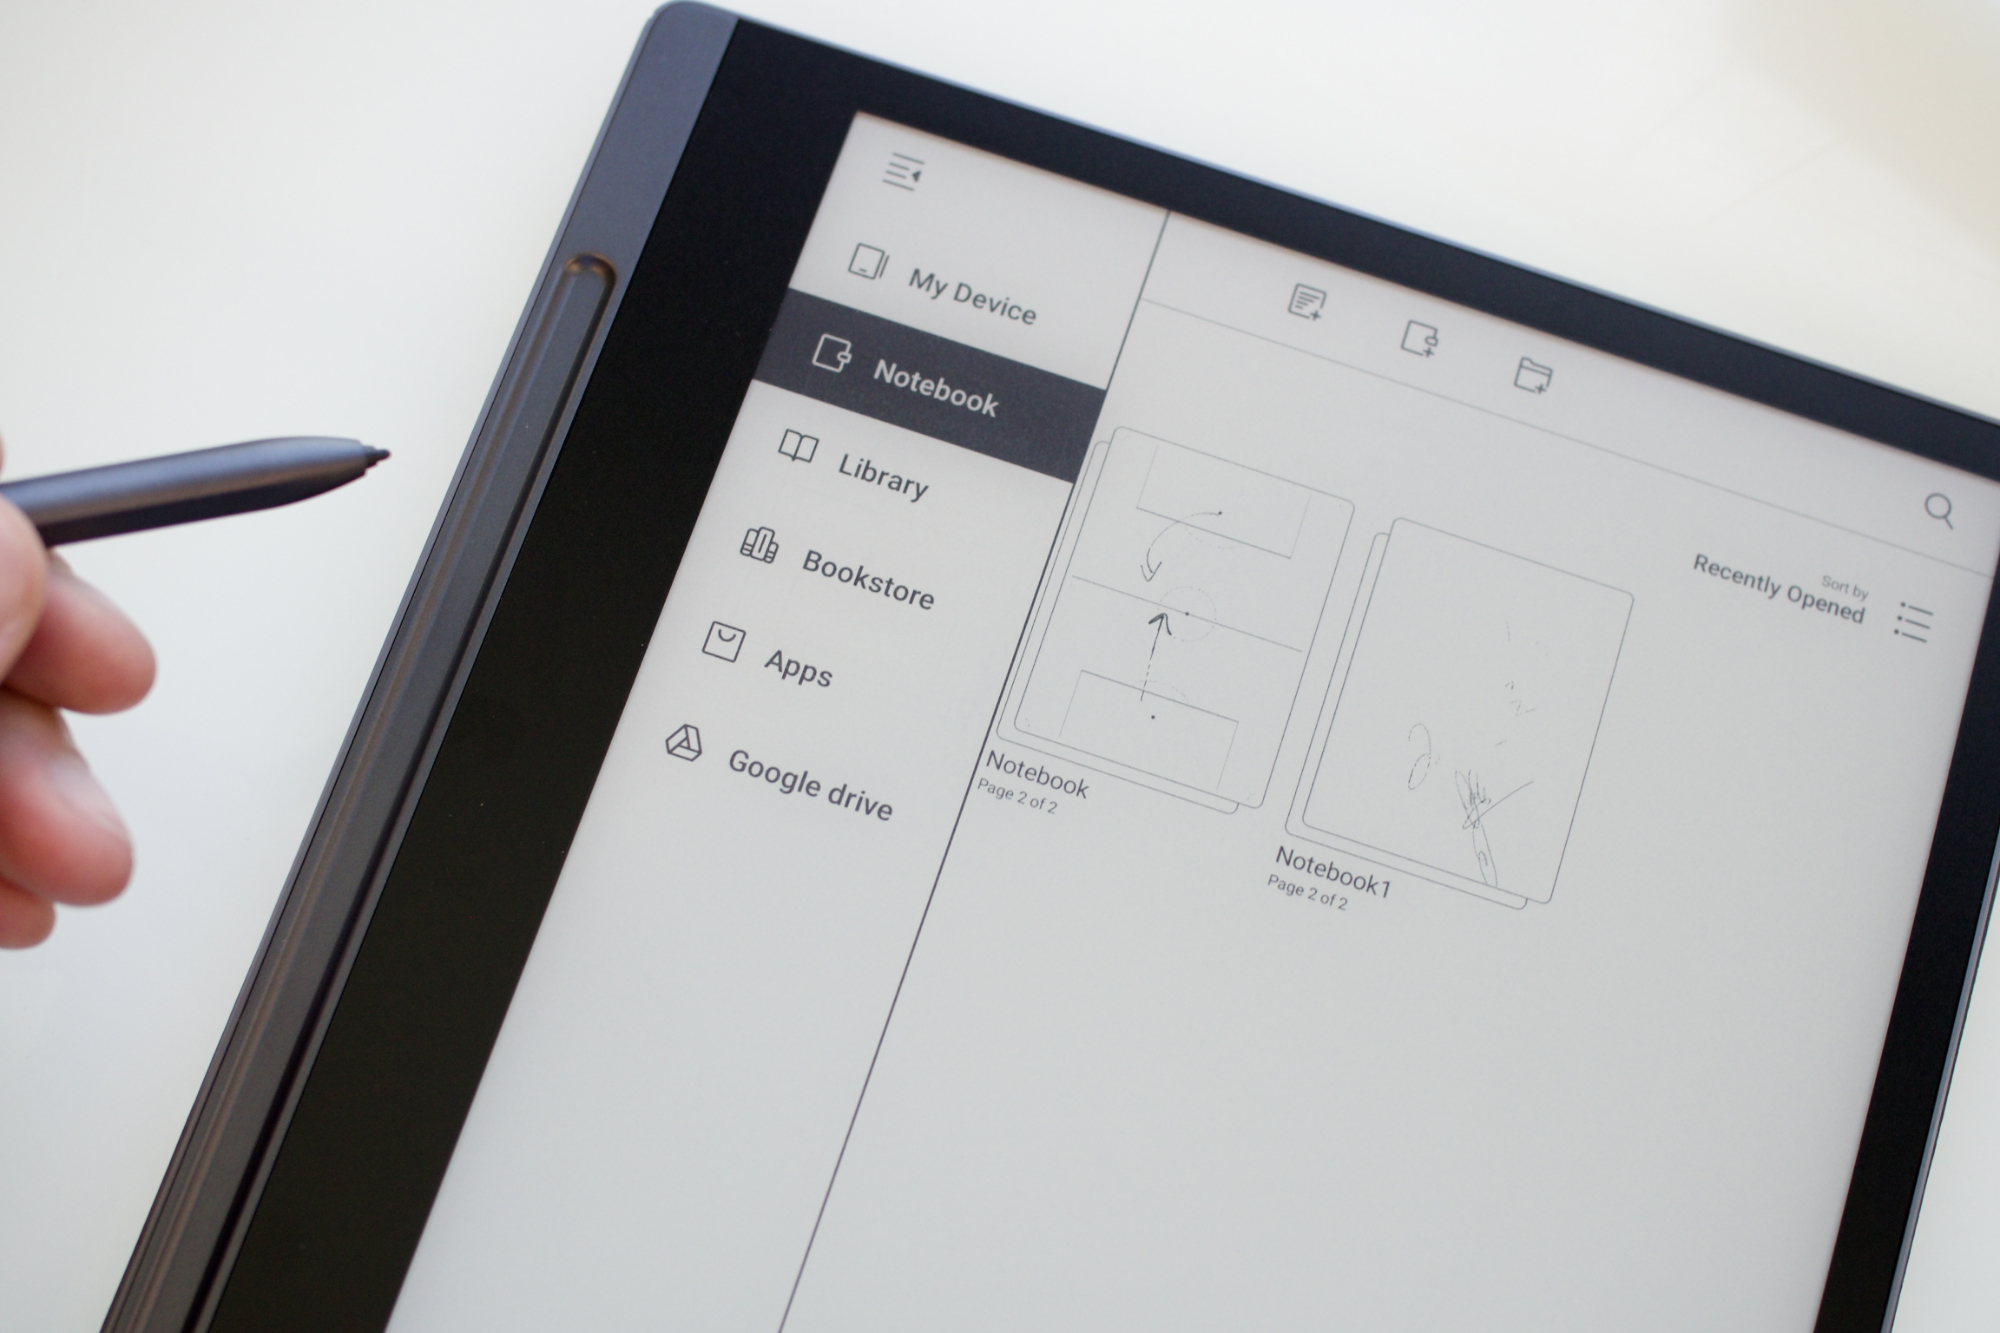 Sony unveils new Digital Paper office-based tablet